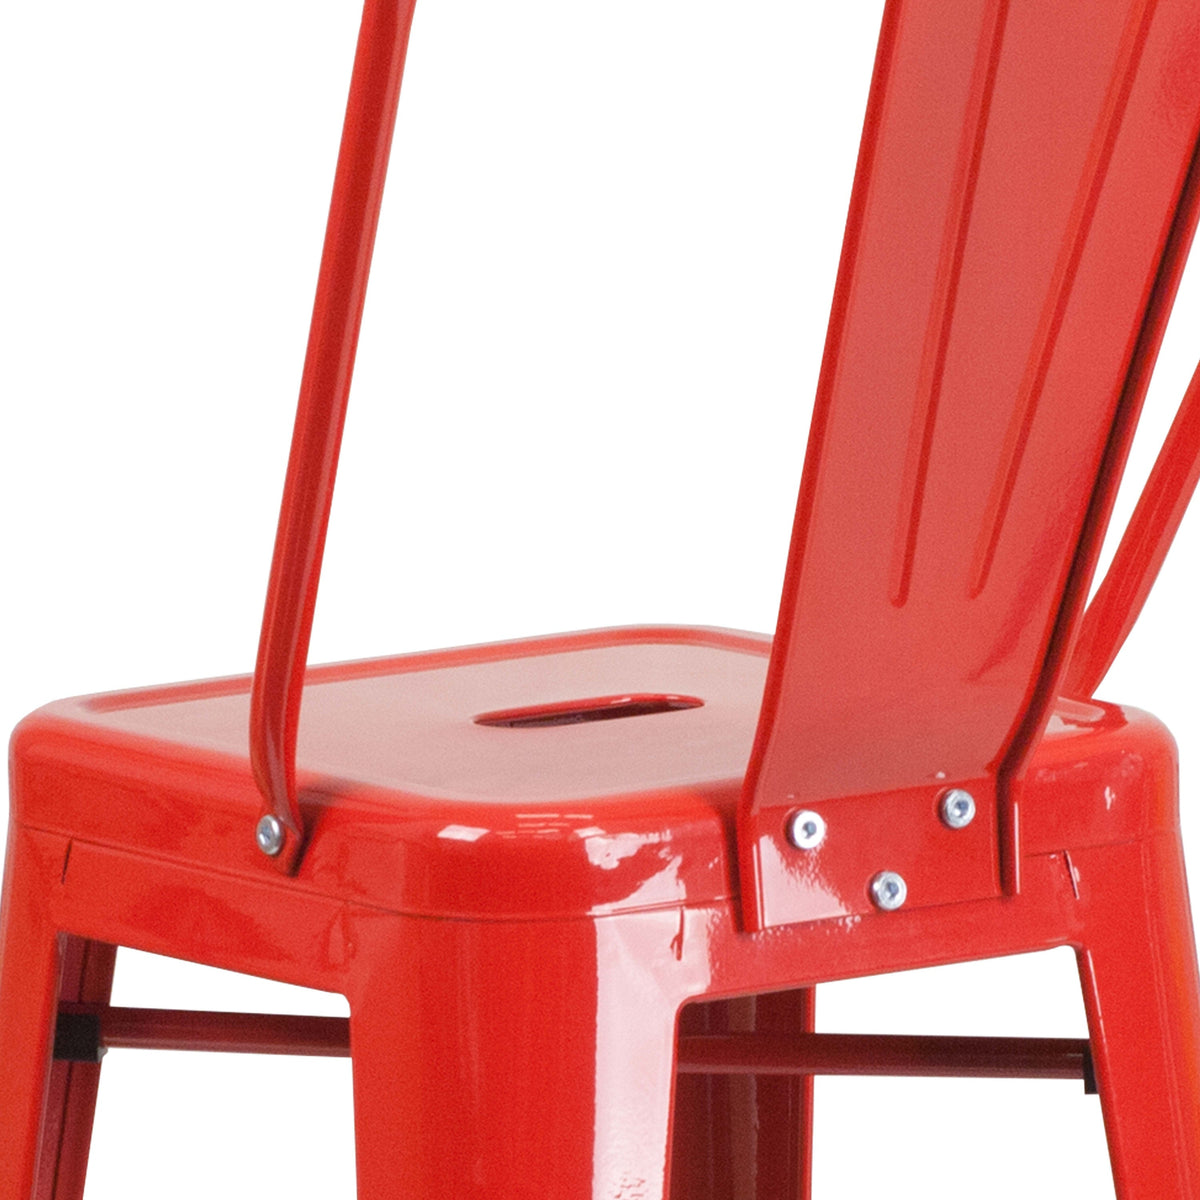 Red |#| 30inch High Red Metal Indoor-Outdoor Barstool with Back - Kitchen Furniture